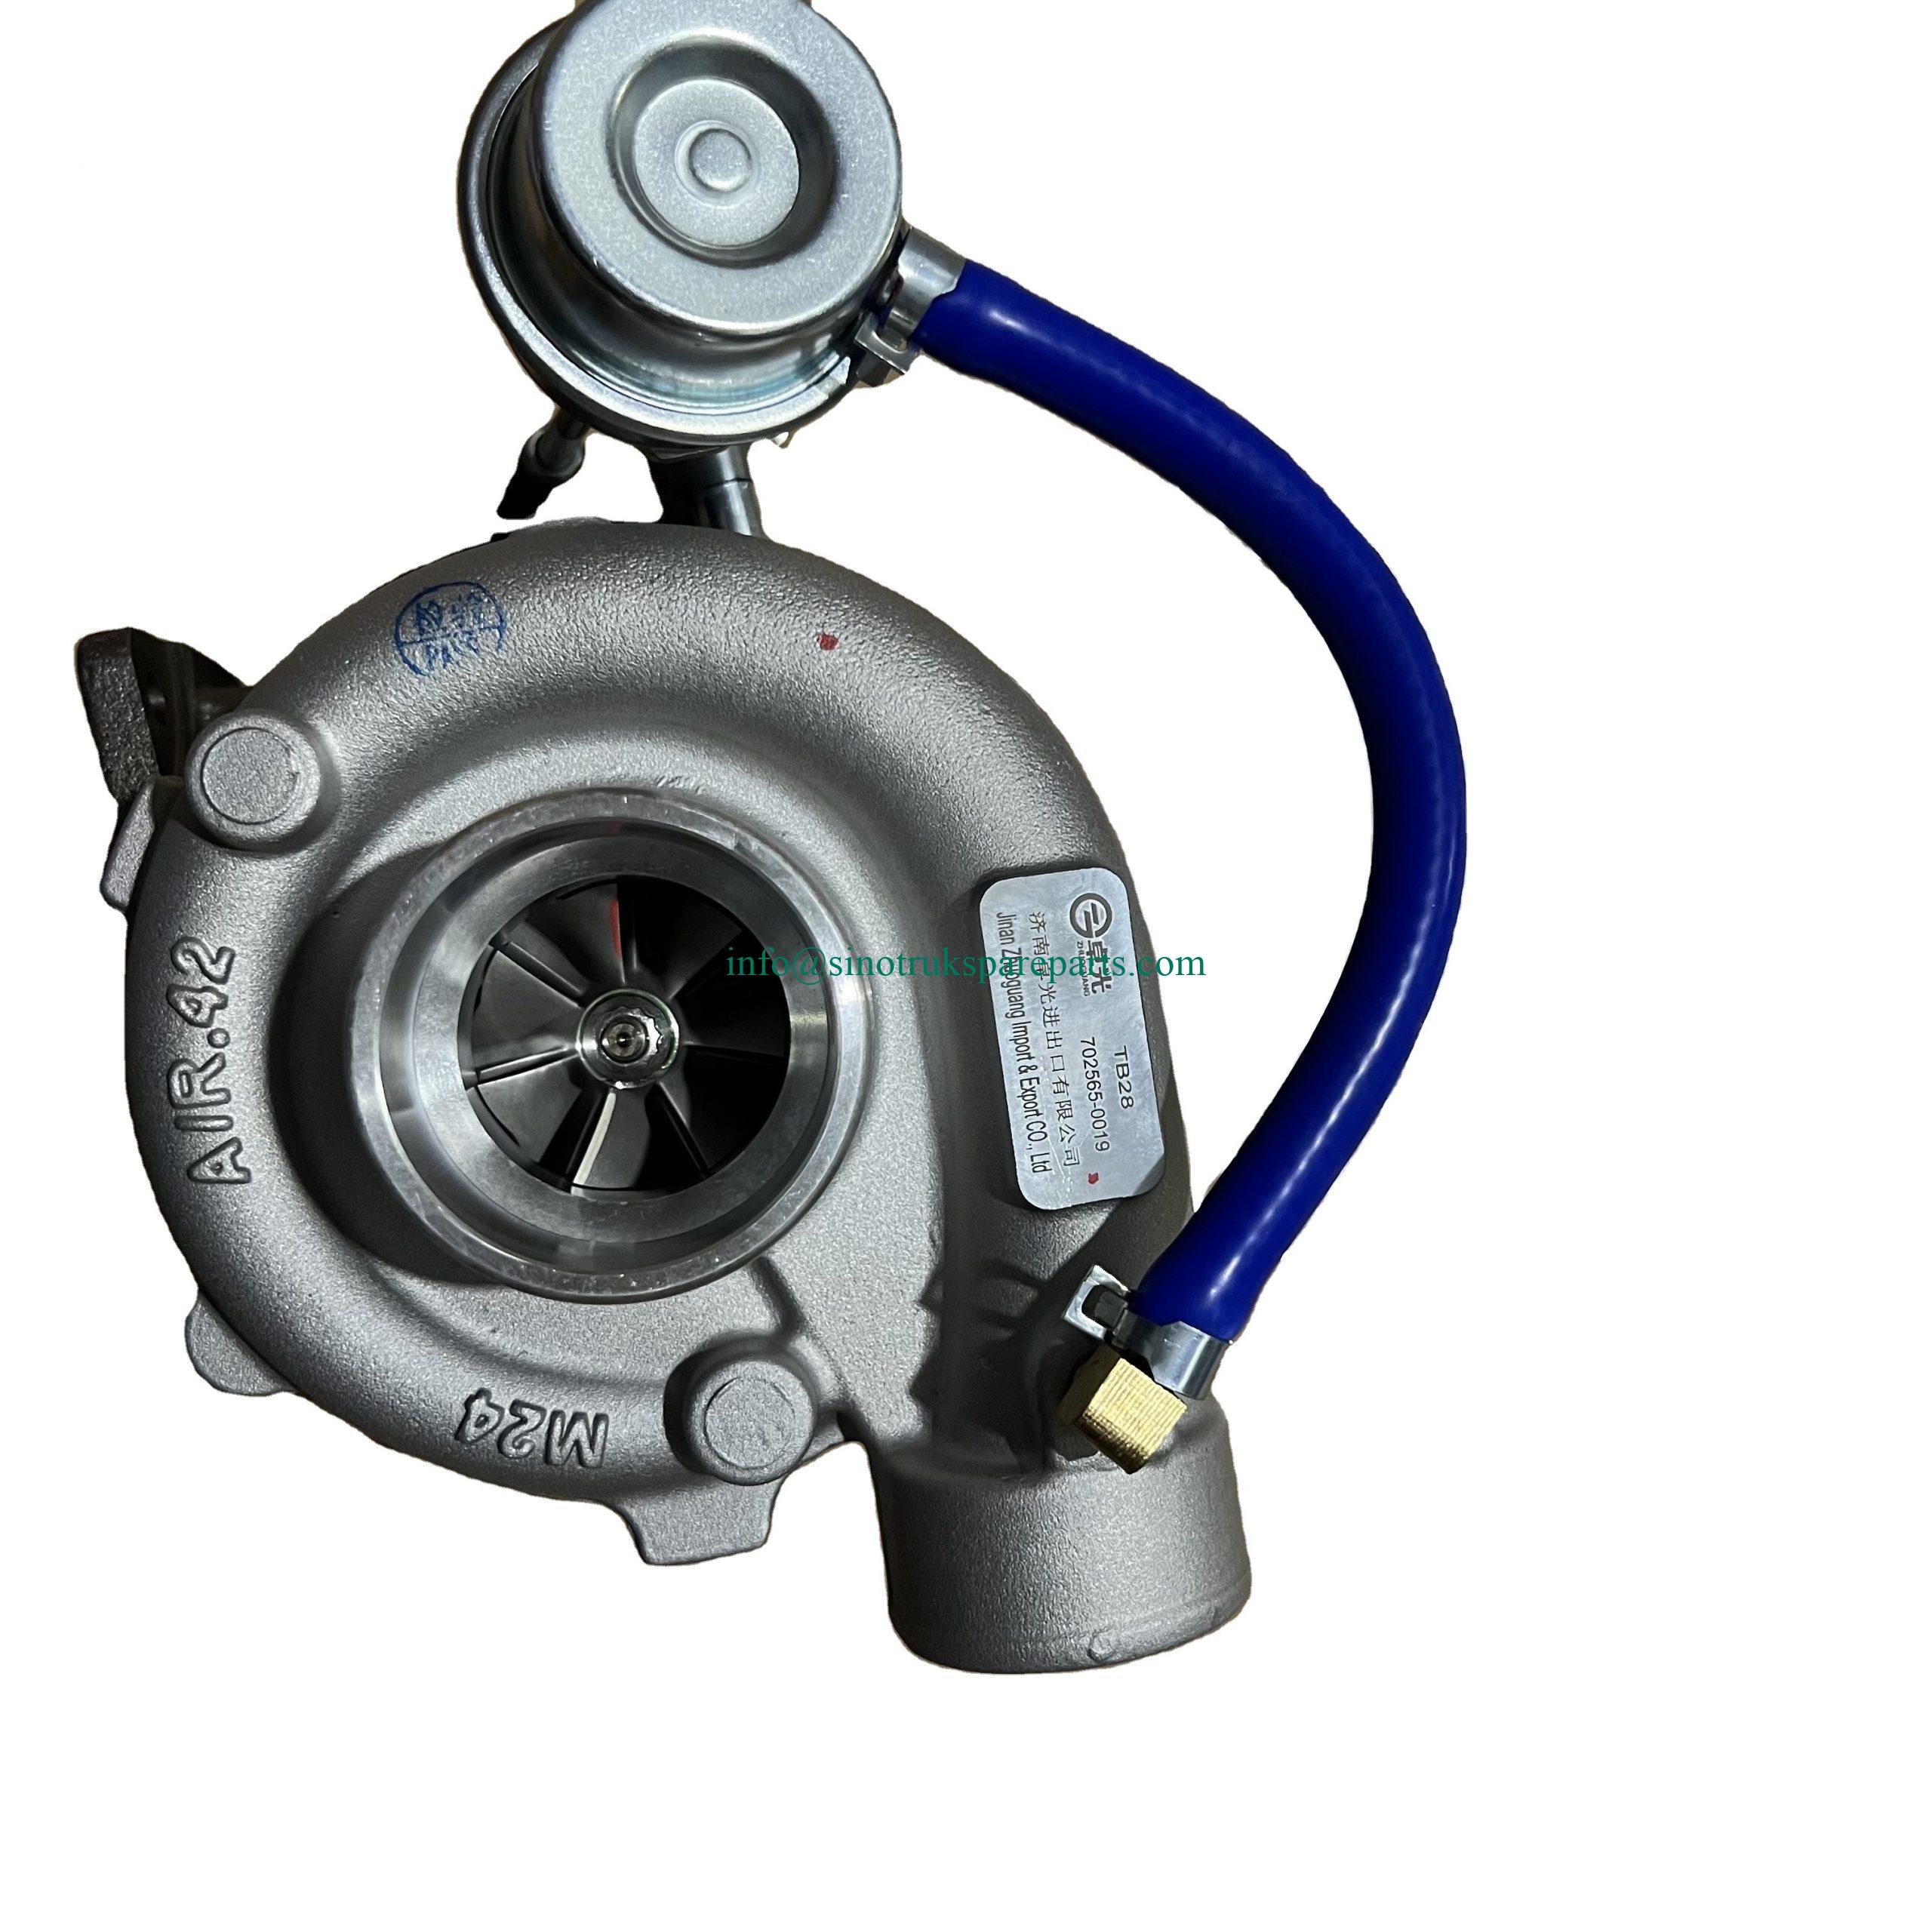 TB28/180528058/702565- 0019 Turbocharger for Howos